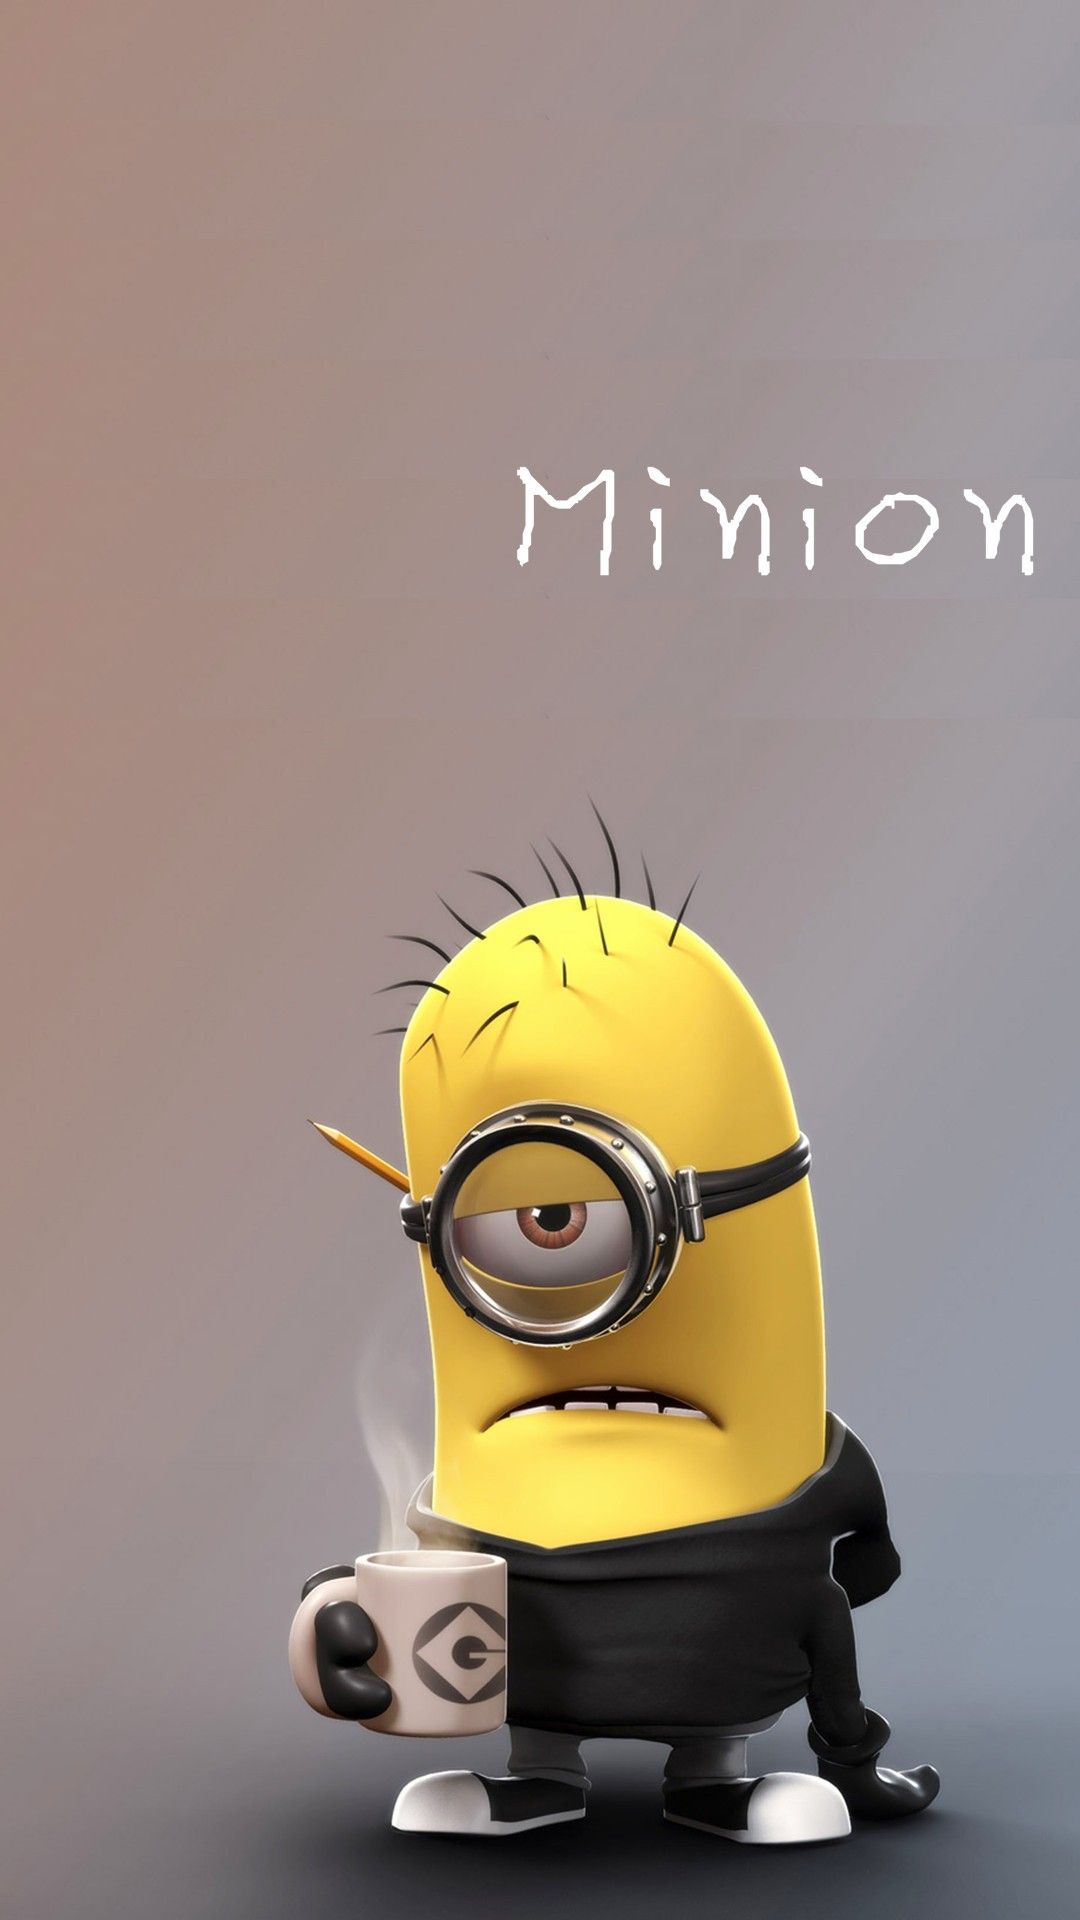 minions hd wallpapers for iphone 6,yellow,animation,toy,smile,action figure